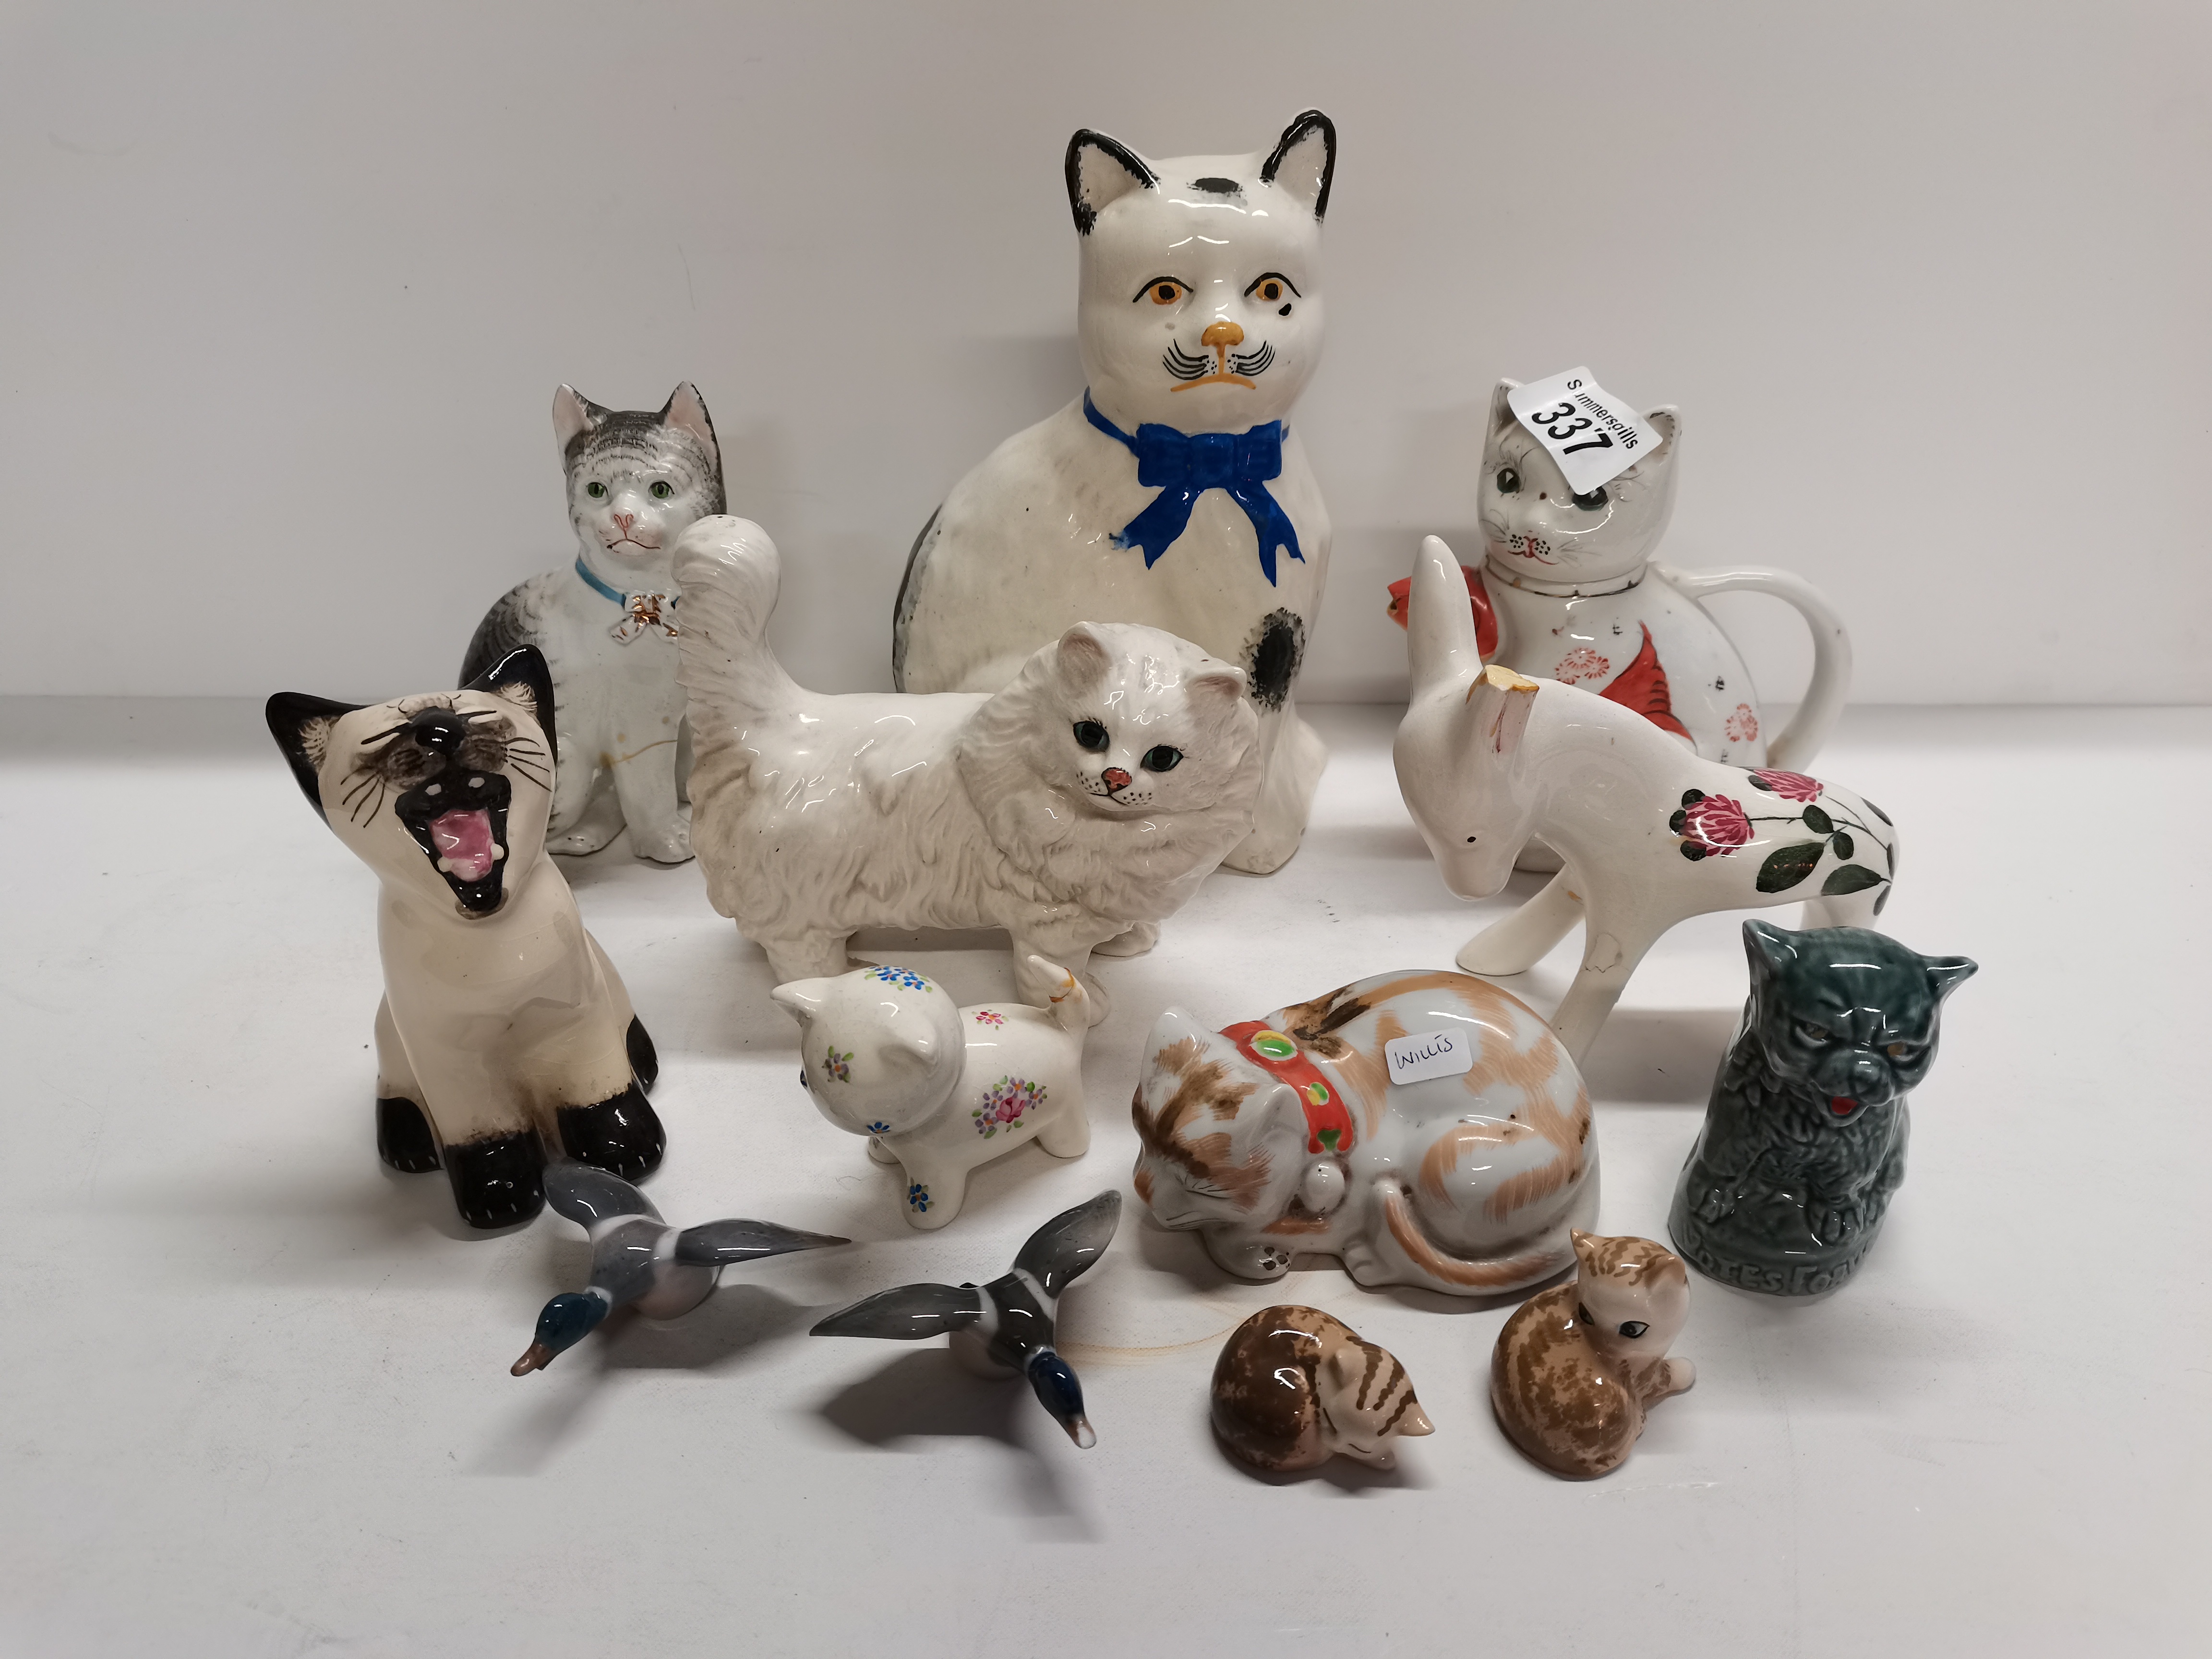 13 Pieces of Pottery 10 cats 2 ducks and a donkey Including 1 Beswick Cat (Damaged Ear to Donkey)